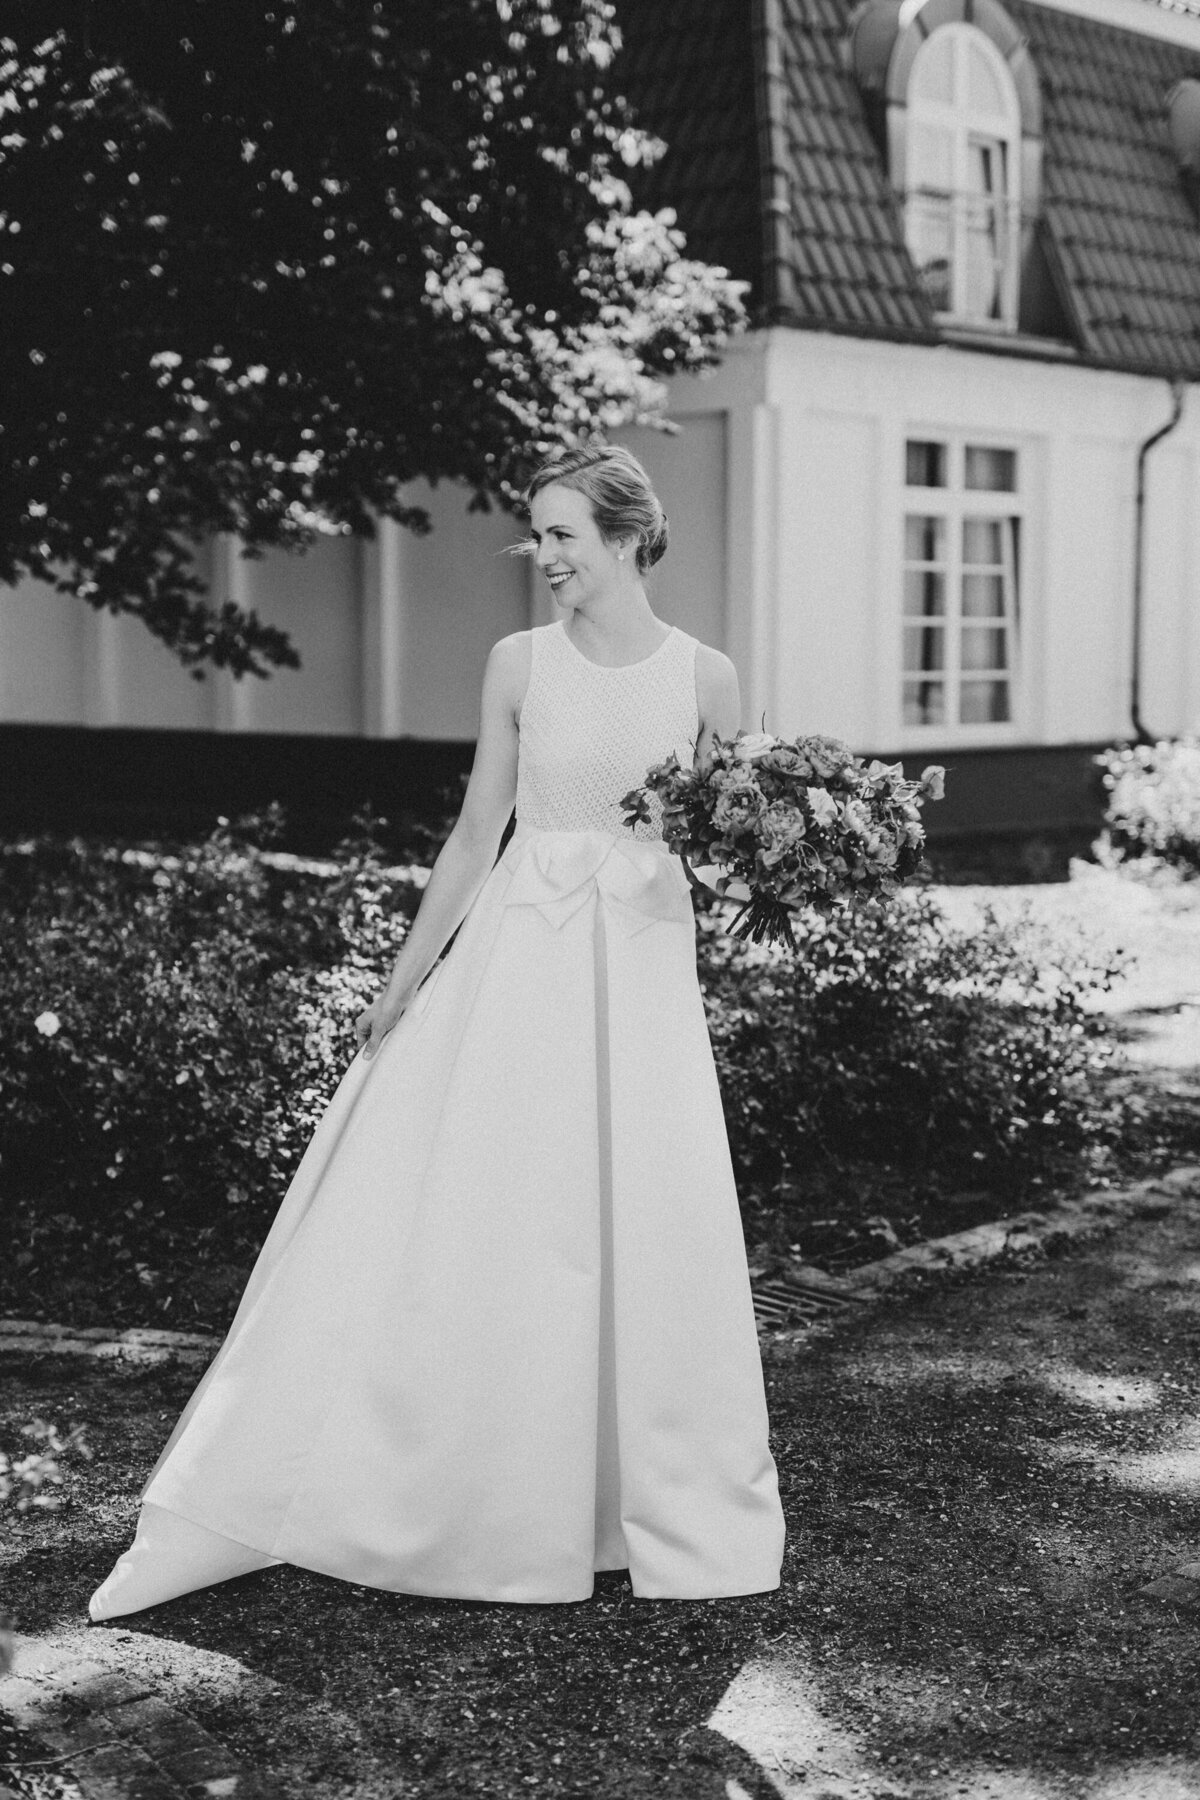 05_60 - 20210814_Wedding_Annika_Fabian_157-2-2_Elegant and timeless luxury wedding in Germany designed by floral and event designer Grace and Flowers